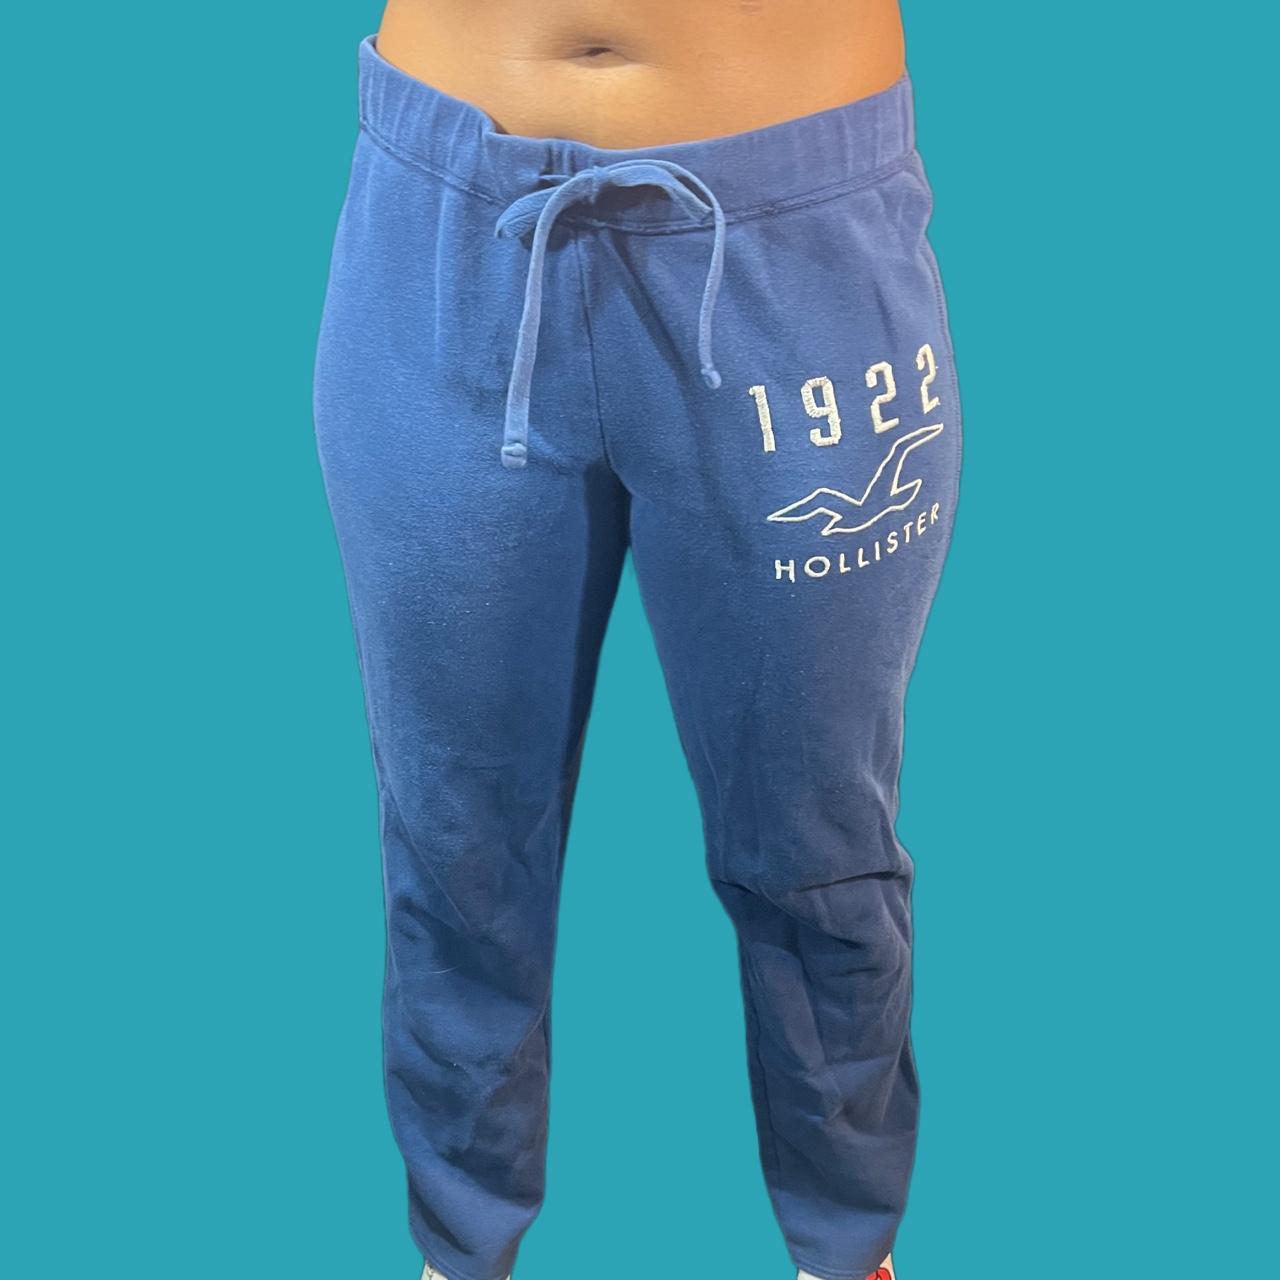 Hollister Y2K Sweatpants Size Small Shipping Price: - Depop